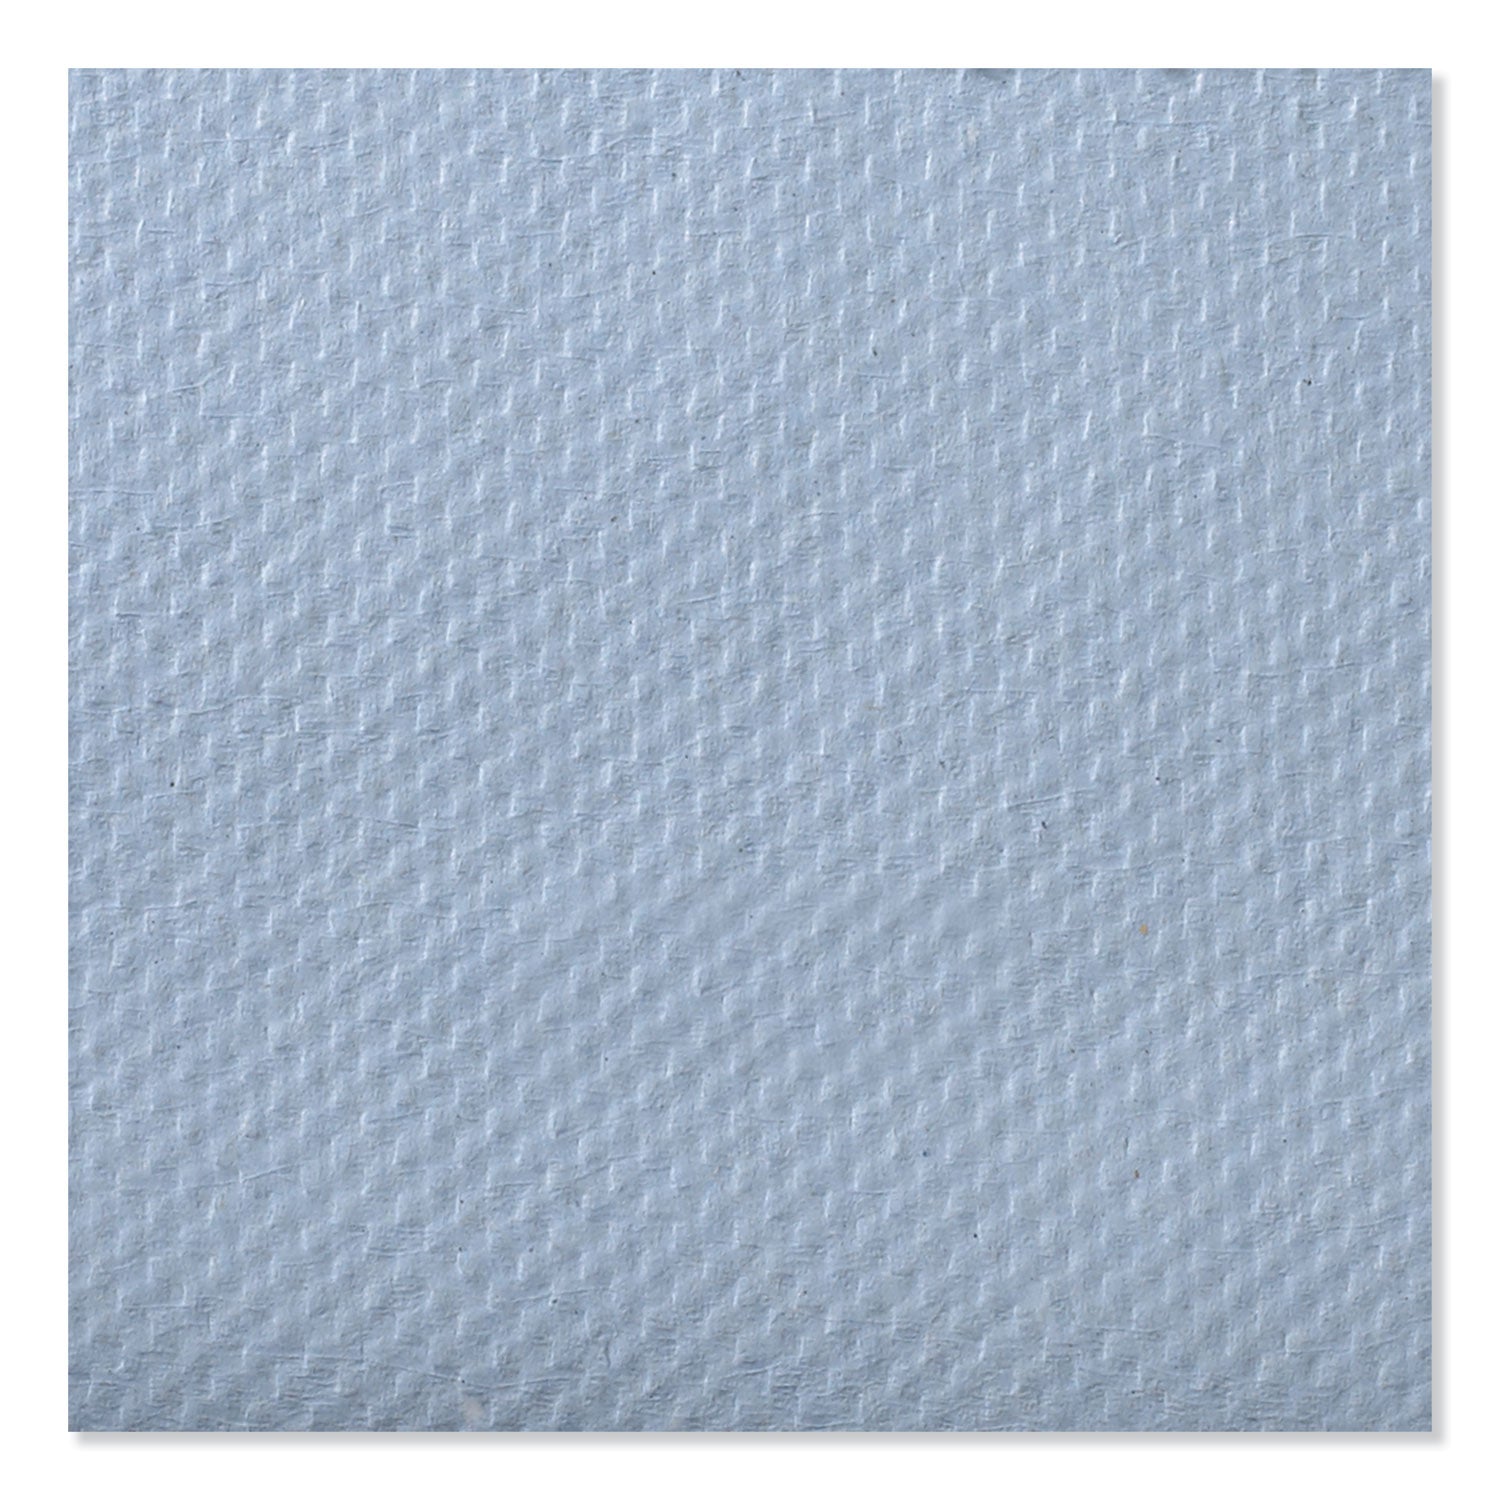 windshield-towel-one-ply-913-x-1025-blue-250-pack-9-pack-carton_trk192121 - 6